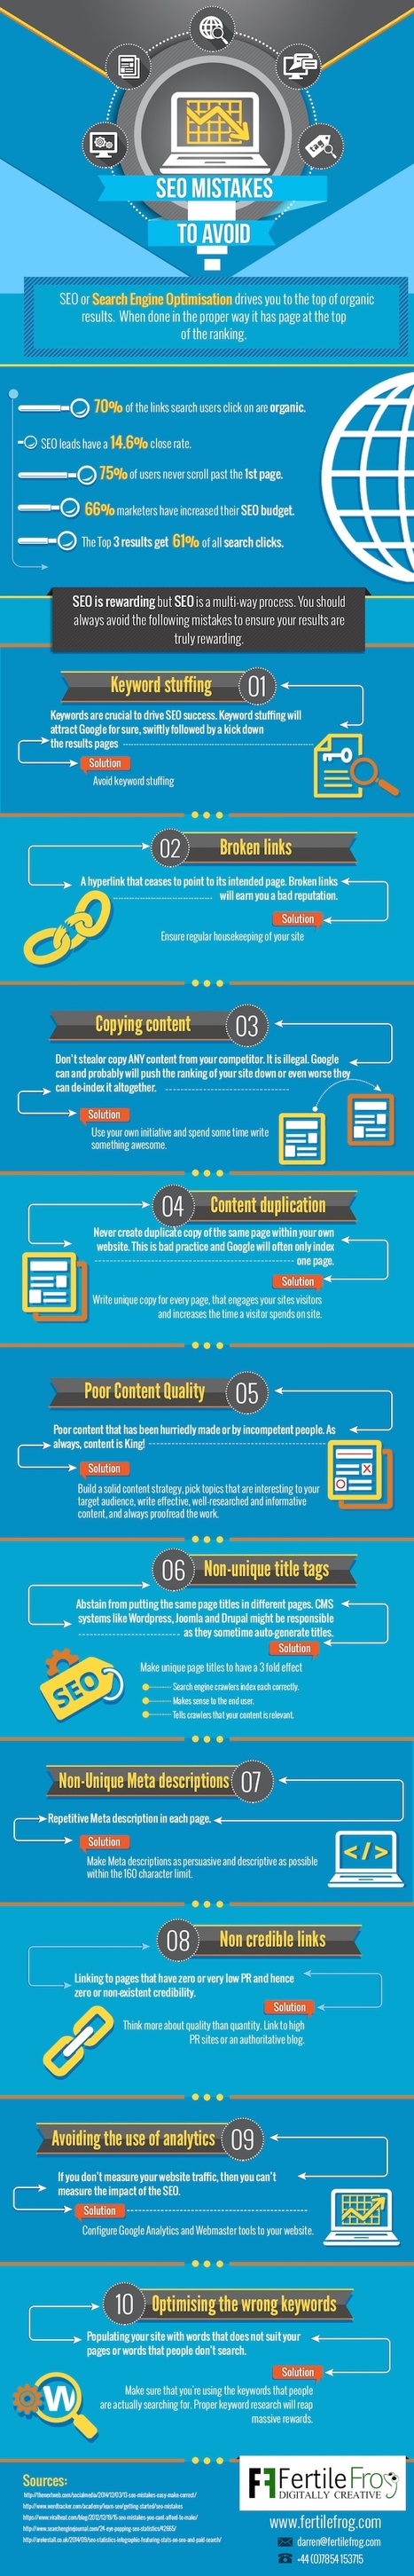 Want to Rank Better in Search? Avoid These 10 SEO Mistakes [Infographic] | Latest Social Media News | Scoop.it